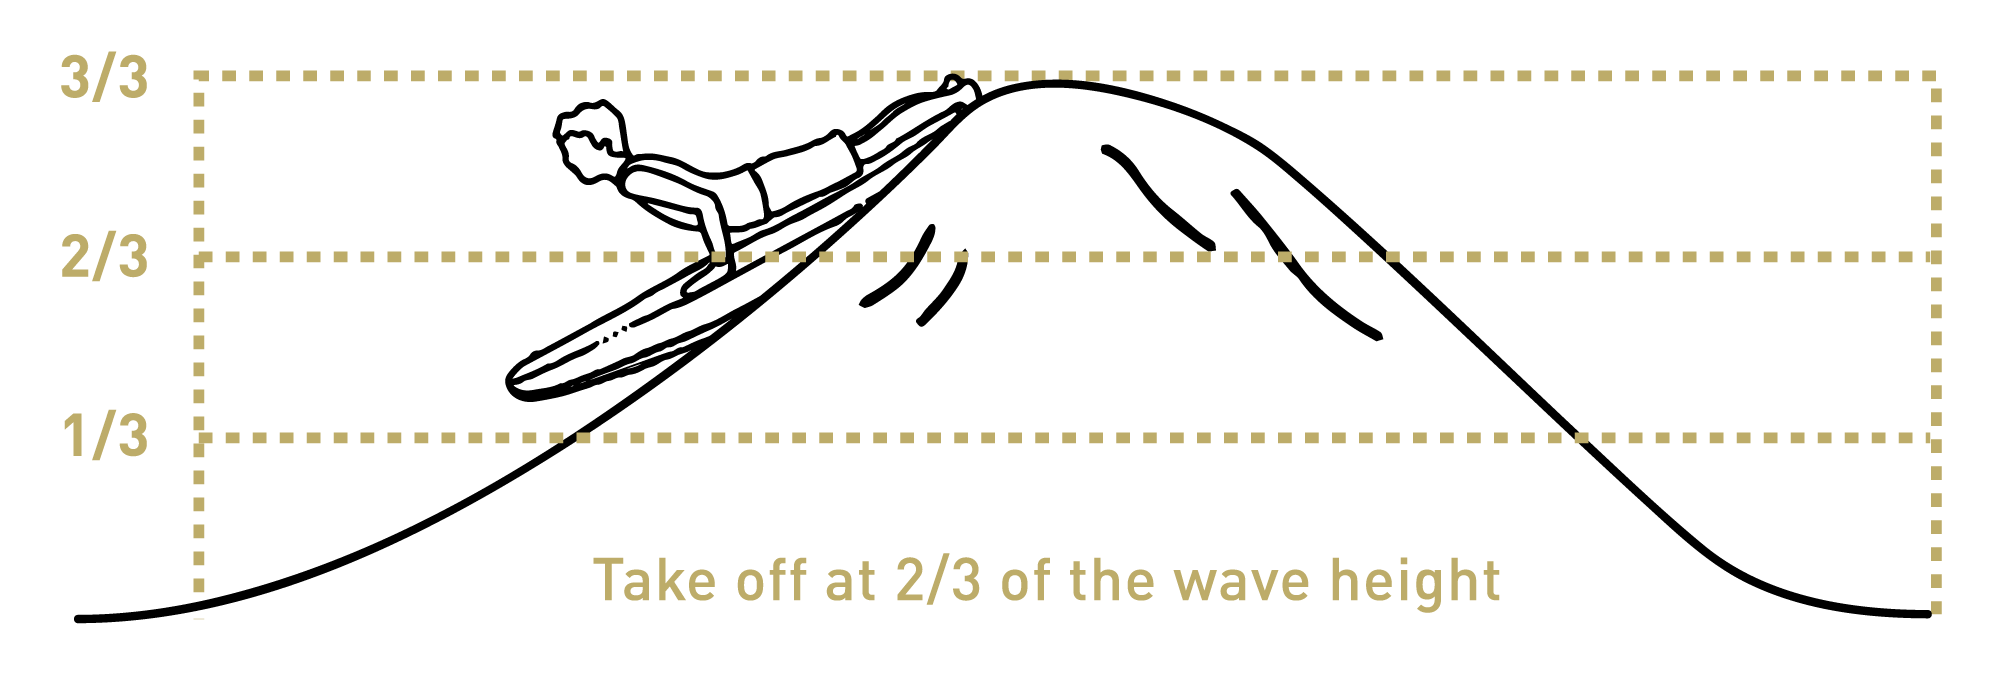 Take off at 2/3 of the wave height